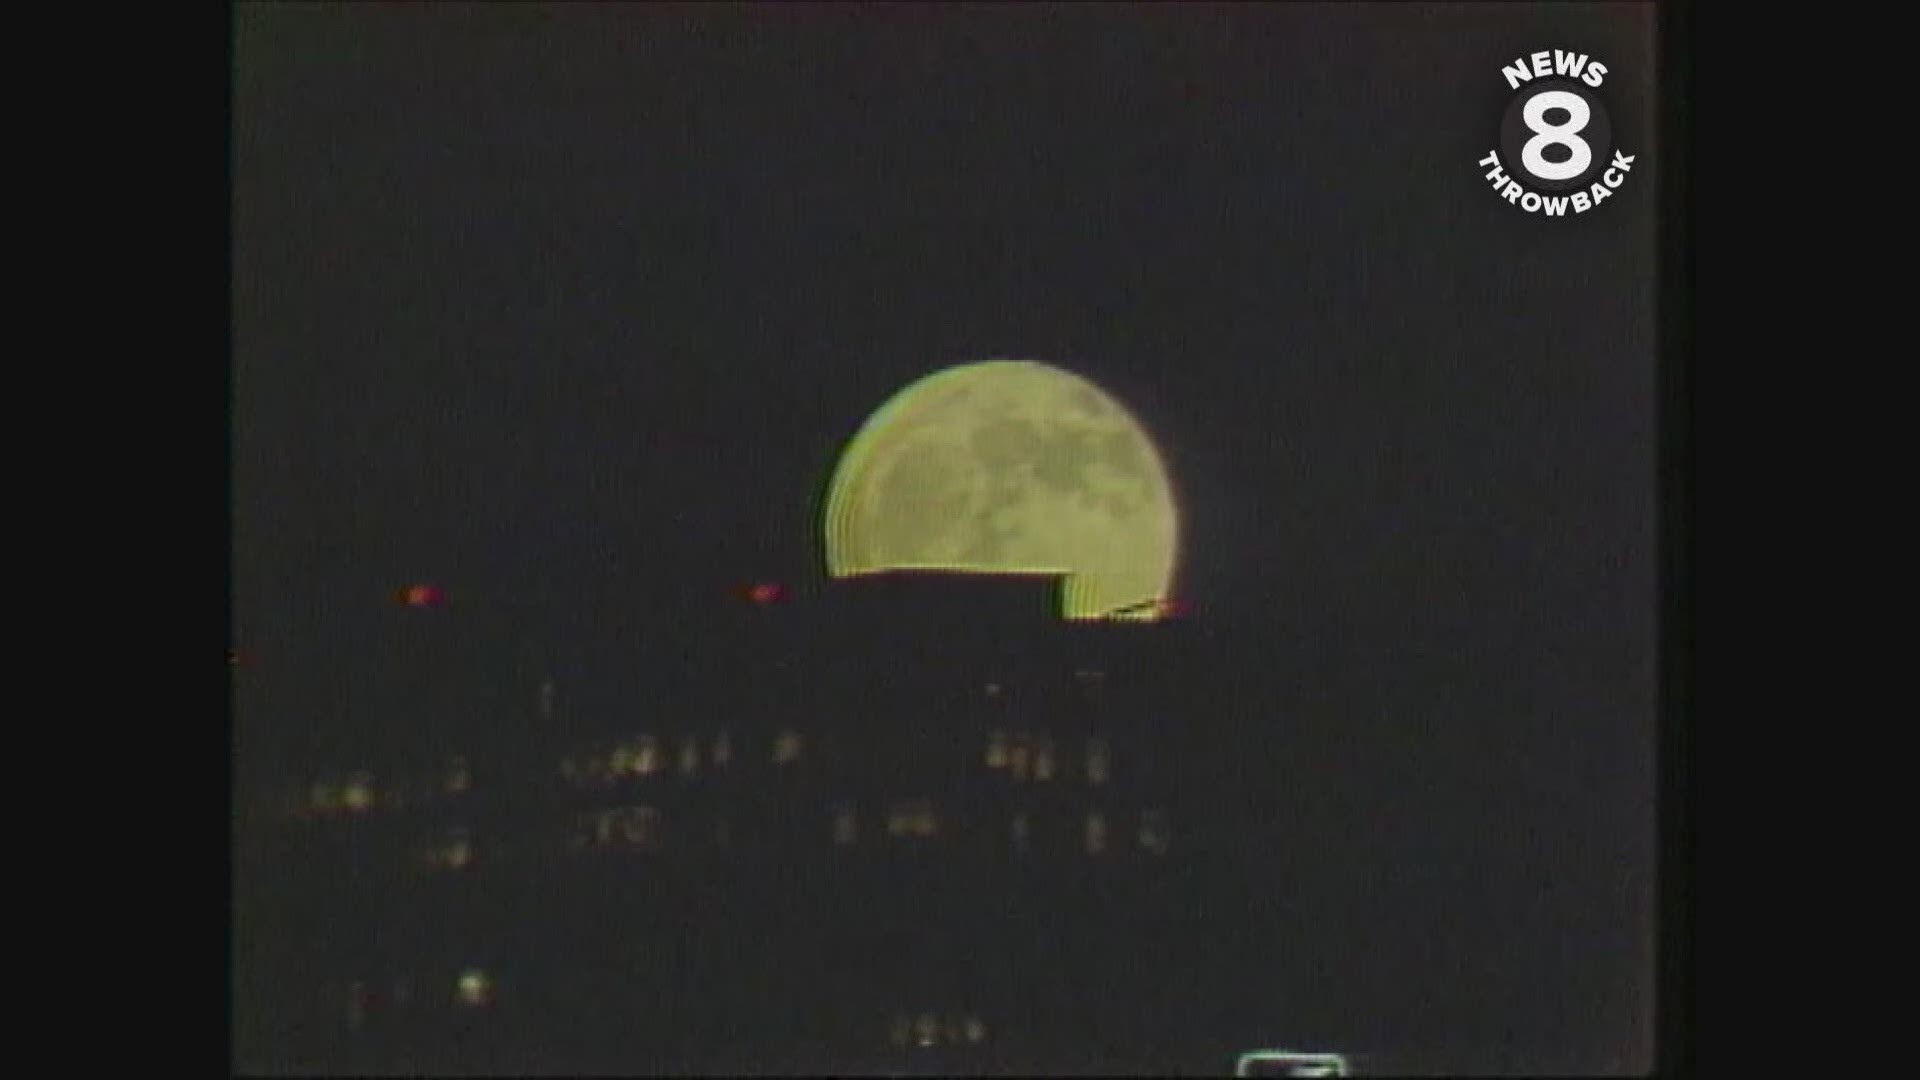 20th anniversary special on Apollo 11 moon landing that aired in 1989